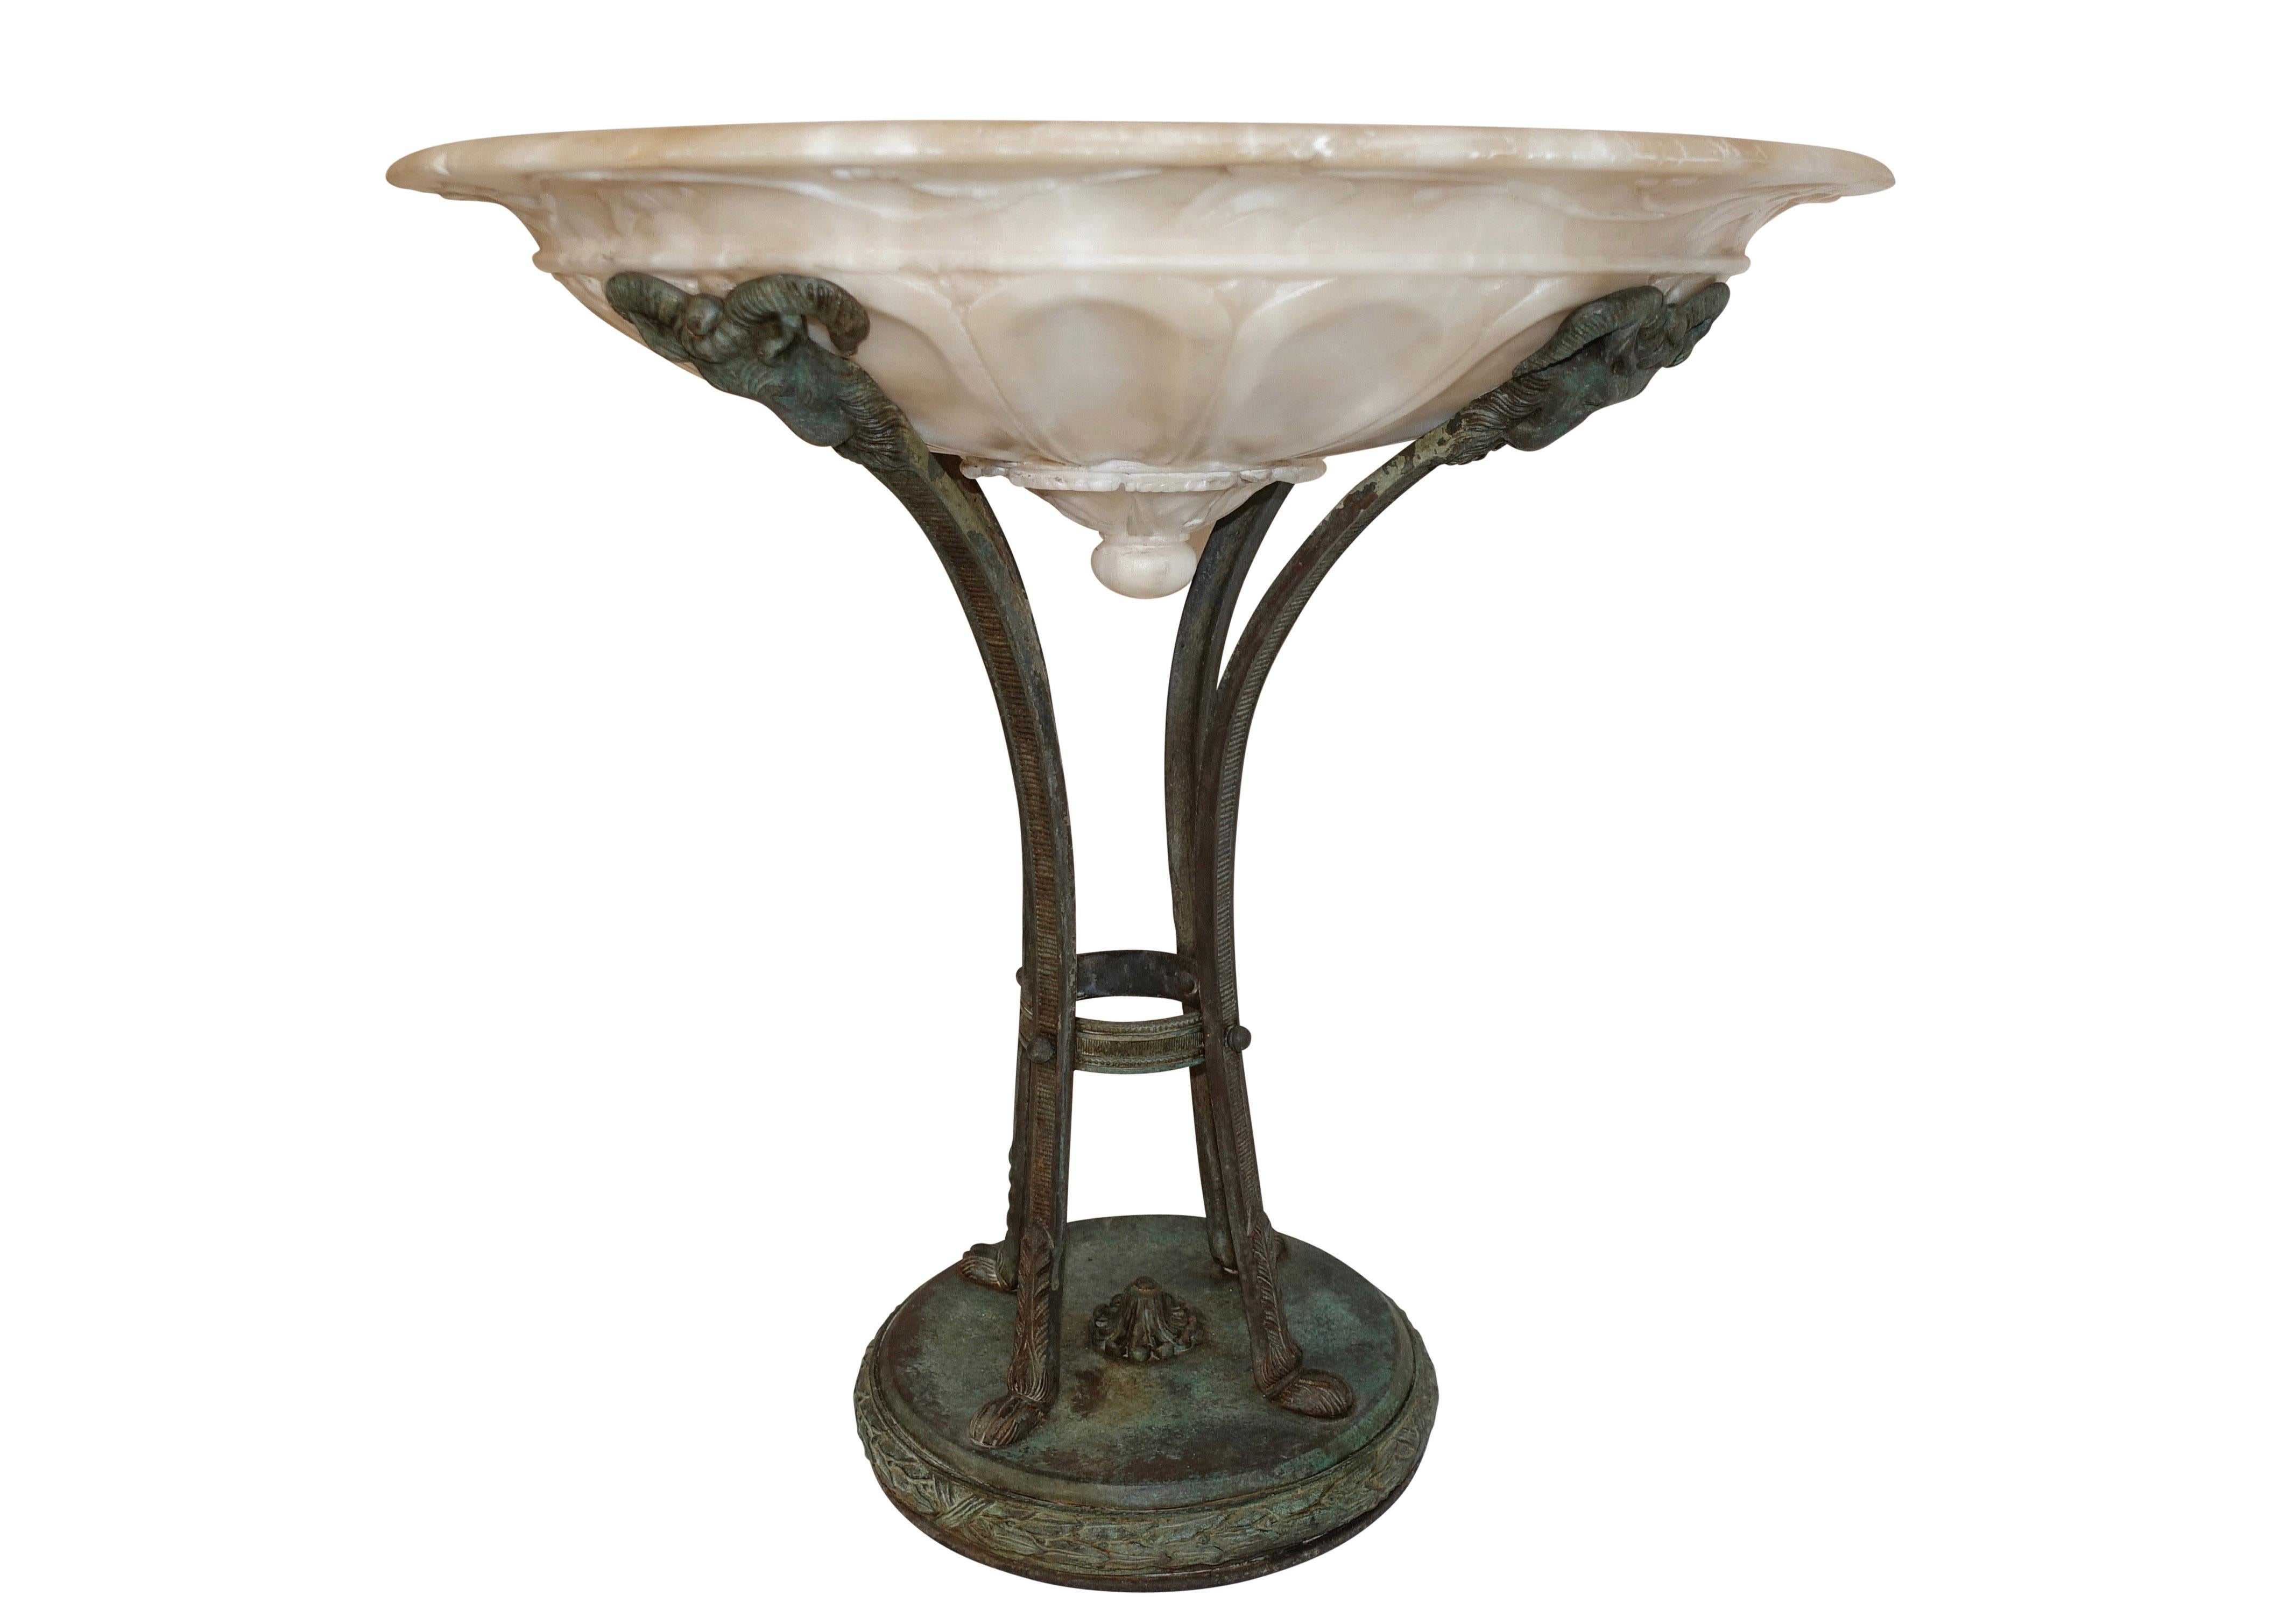 An exuberant alabaster bowl affixed to a rams head bronze stand with paw feet, standing on a circular base of wrapped sheafs of wheat, Italy, circa 1880.